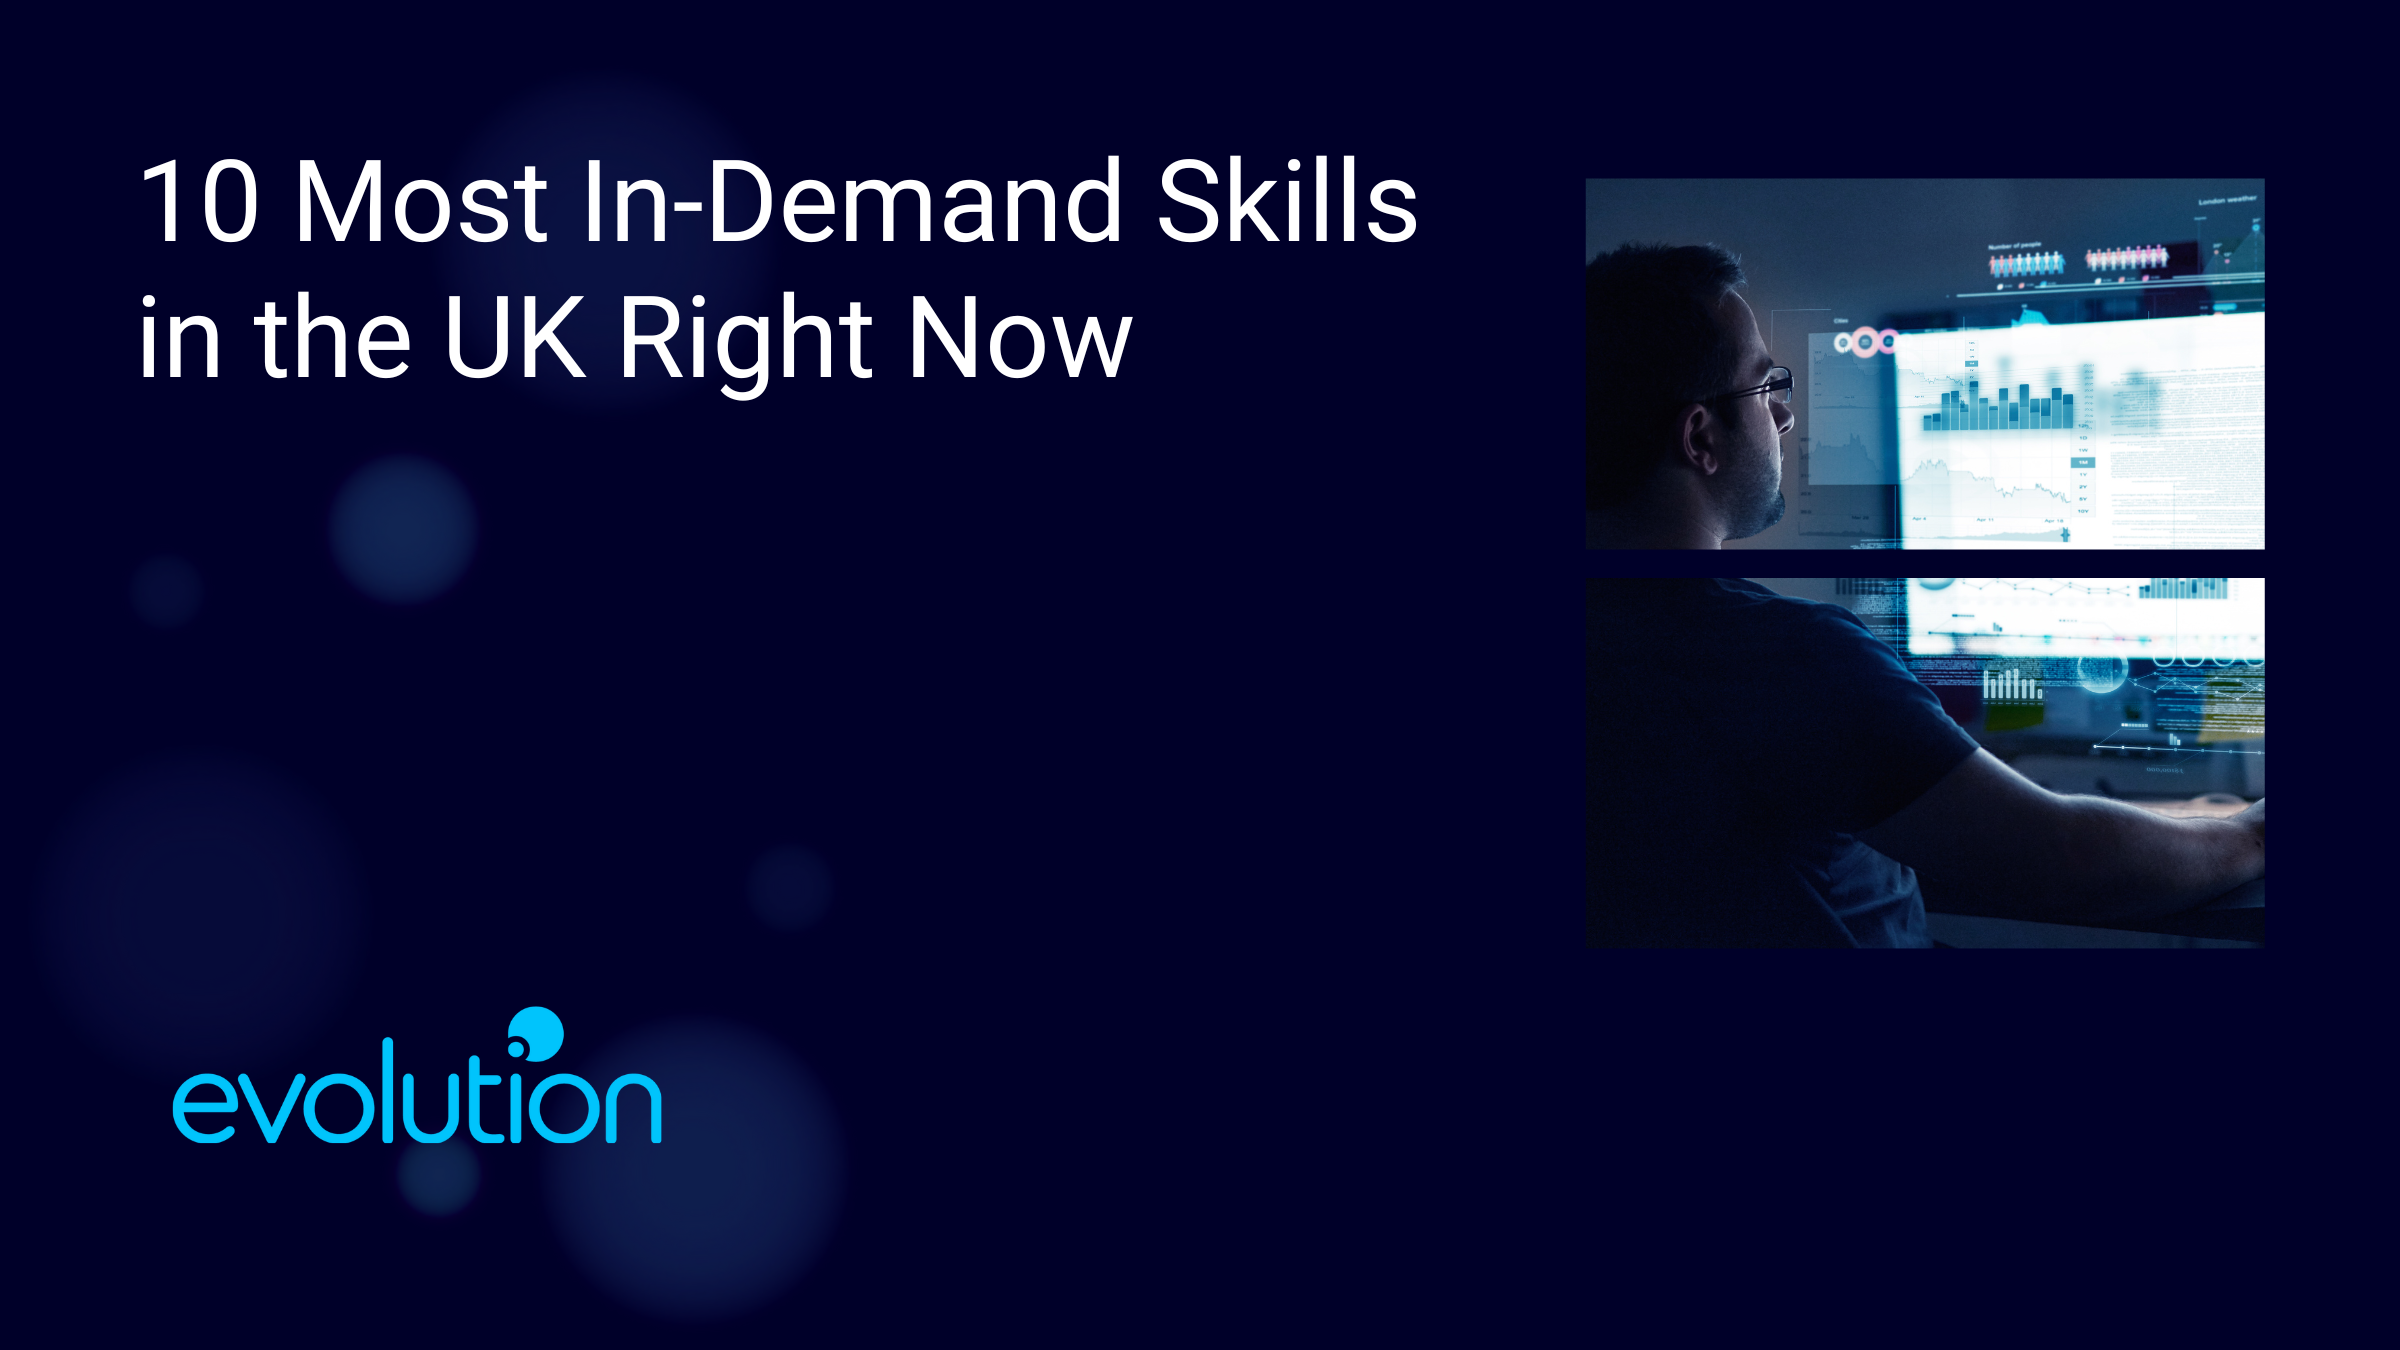 10 Most In-Demand Skills in the UK Right Now